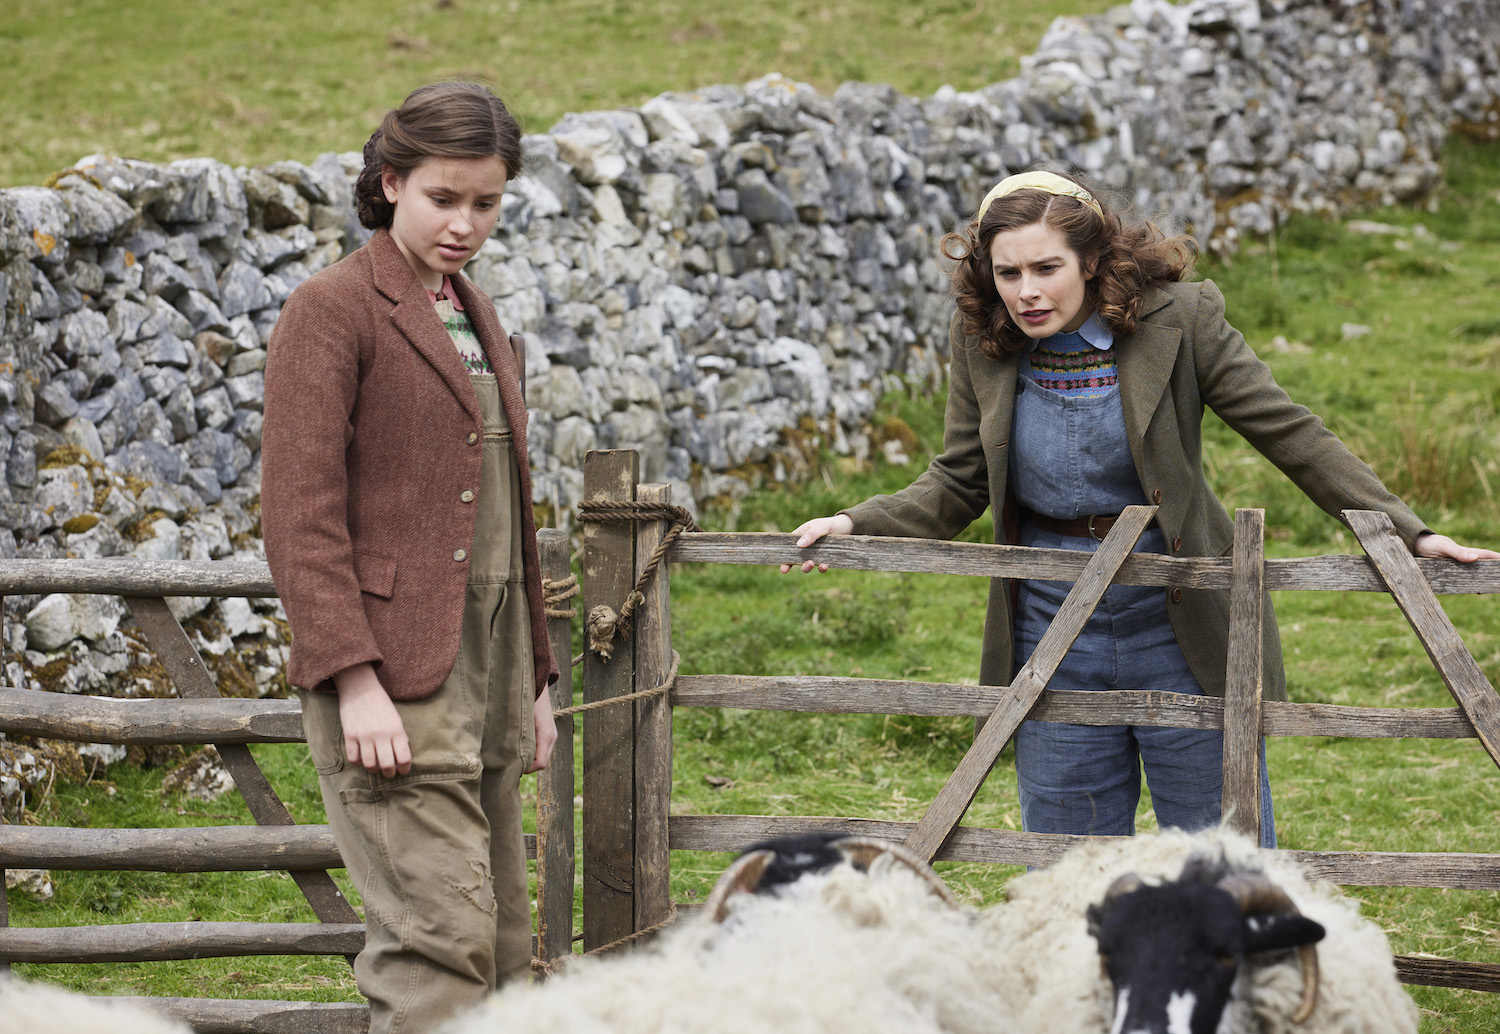 Picture shows: Helen (Rachel Shenton) admires the work her younger sister Jenny (Imogen Clawsen) has done on the farm. The two young women are looking over a fence at a flock of sheep.